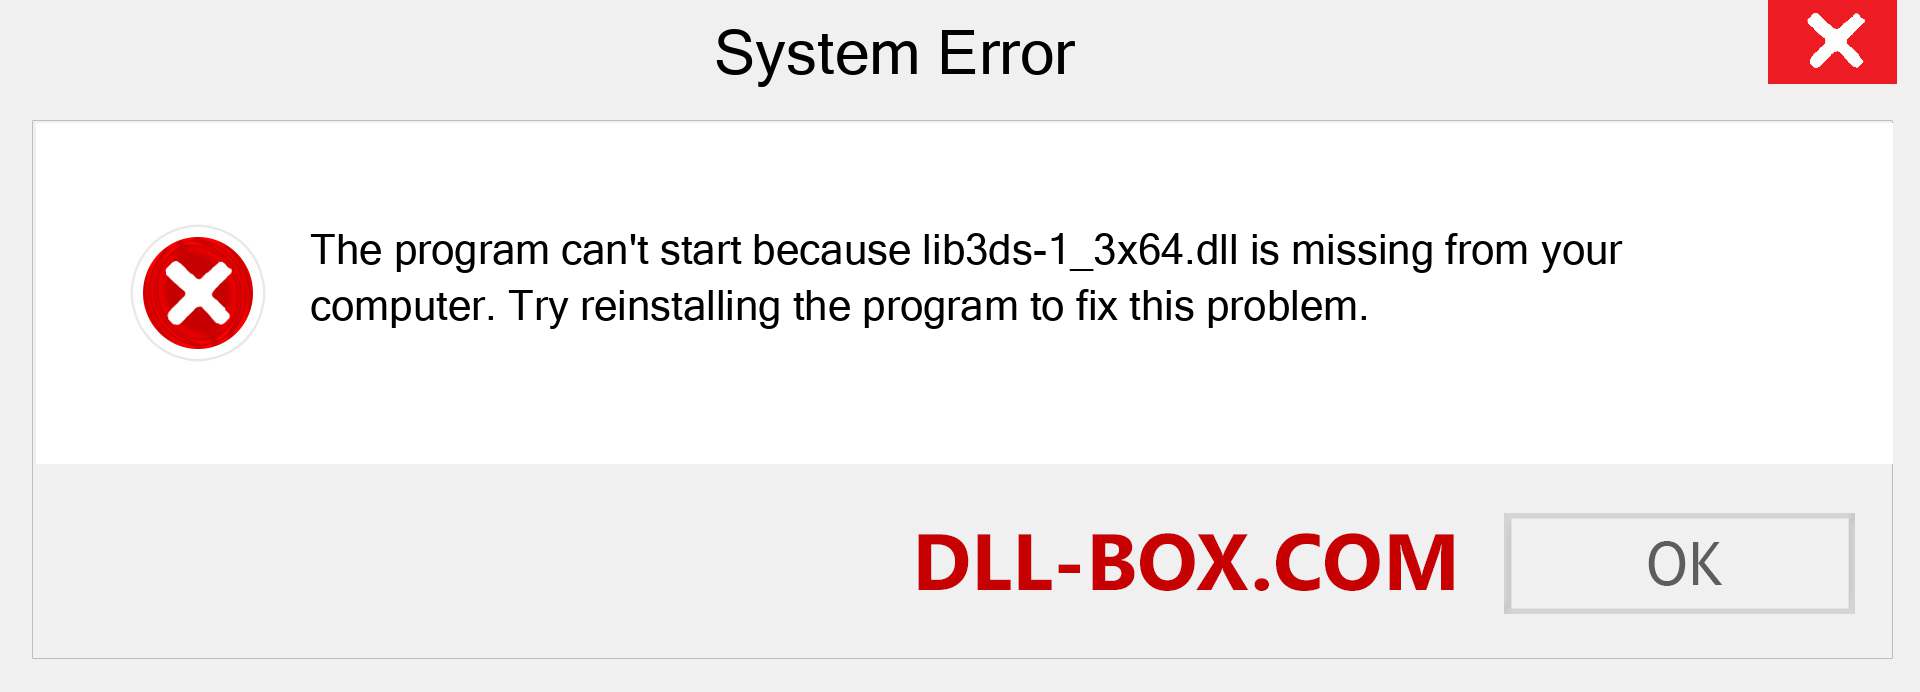  lib3ds-1_3x64.dll file is missing?. Download for Windows 7, 8, 10 - Fix  lib3ds-1_3x64 dll Missing Error on Windows, photos, images